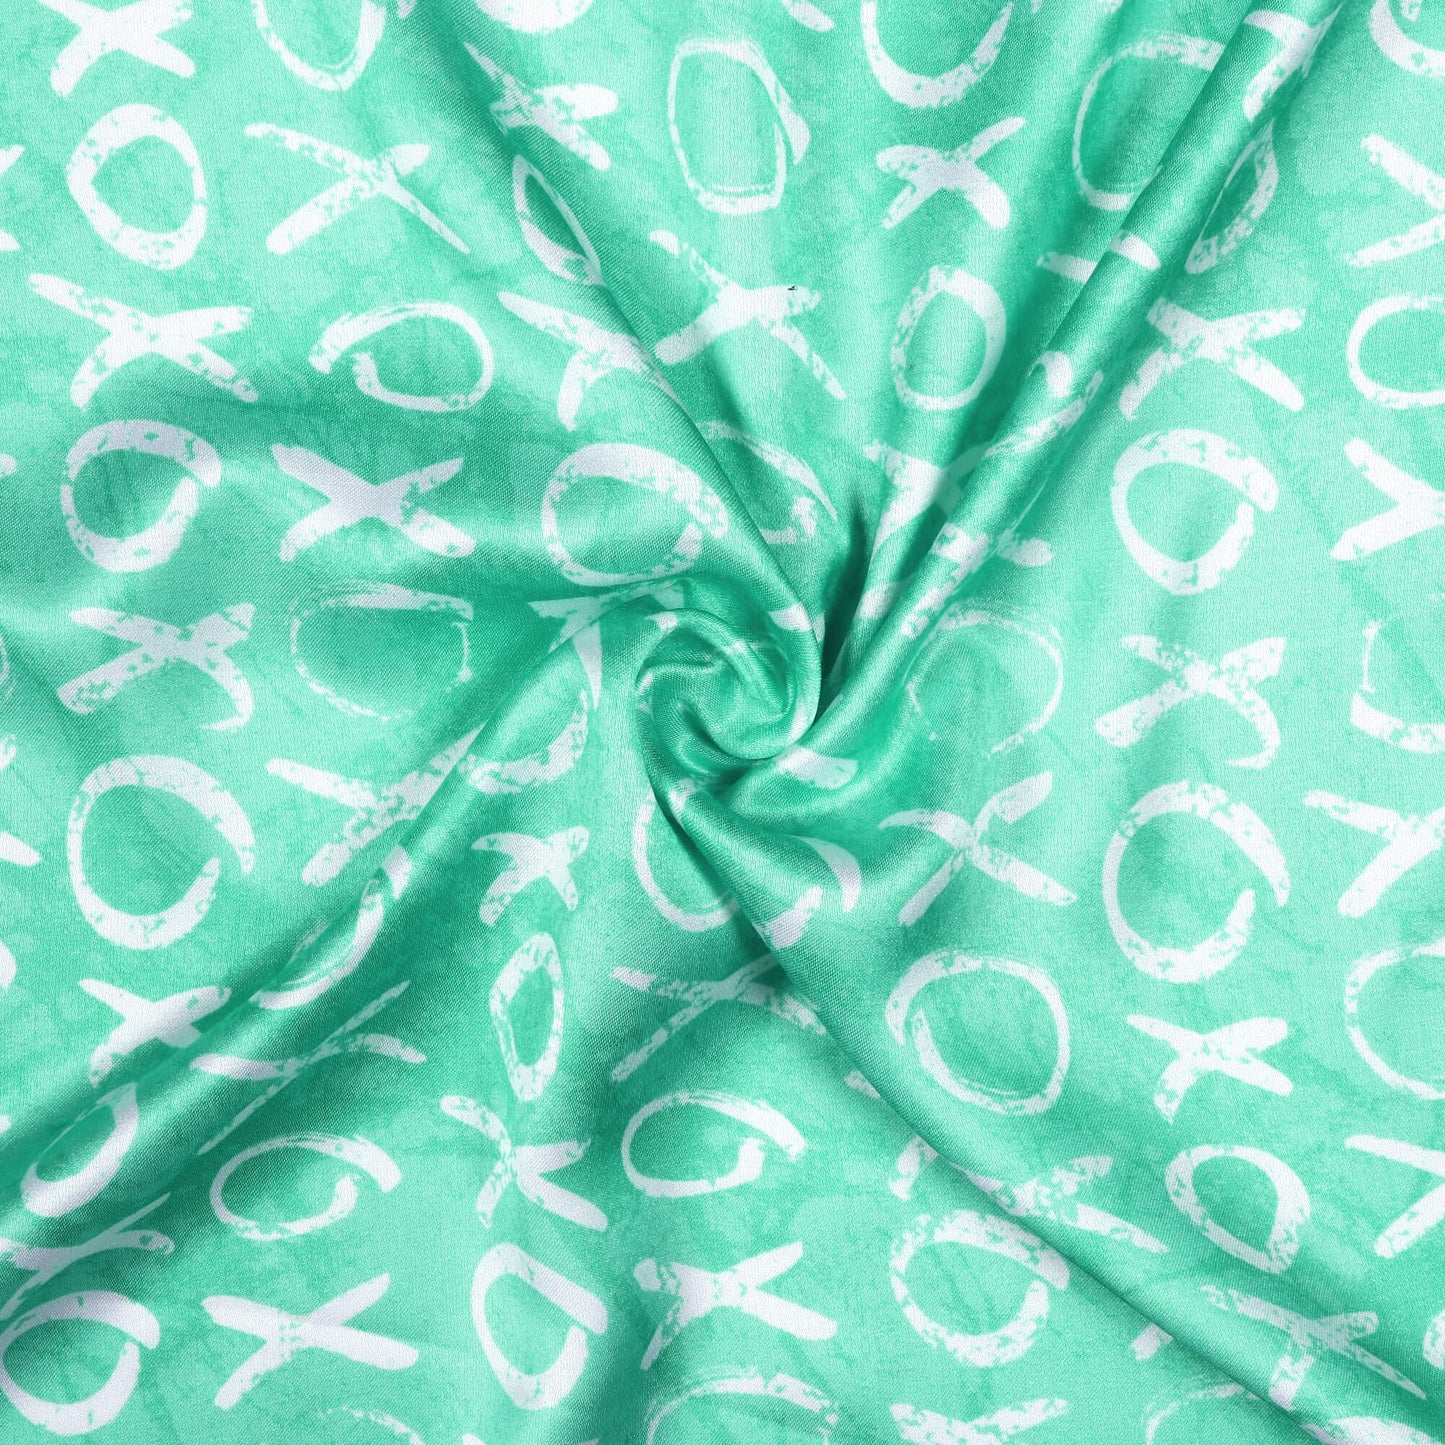 Turquoise And White Quirky Pattern Digital Print Crepe Silk Fabric